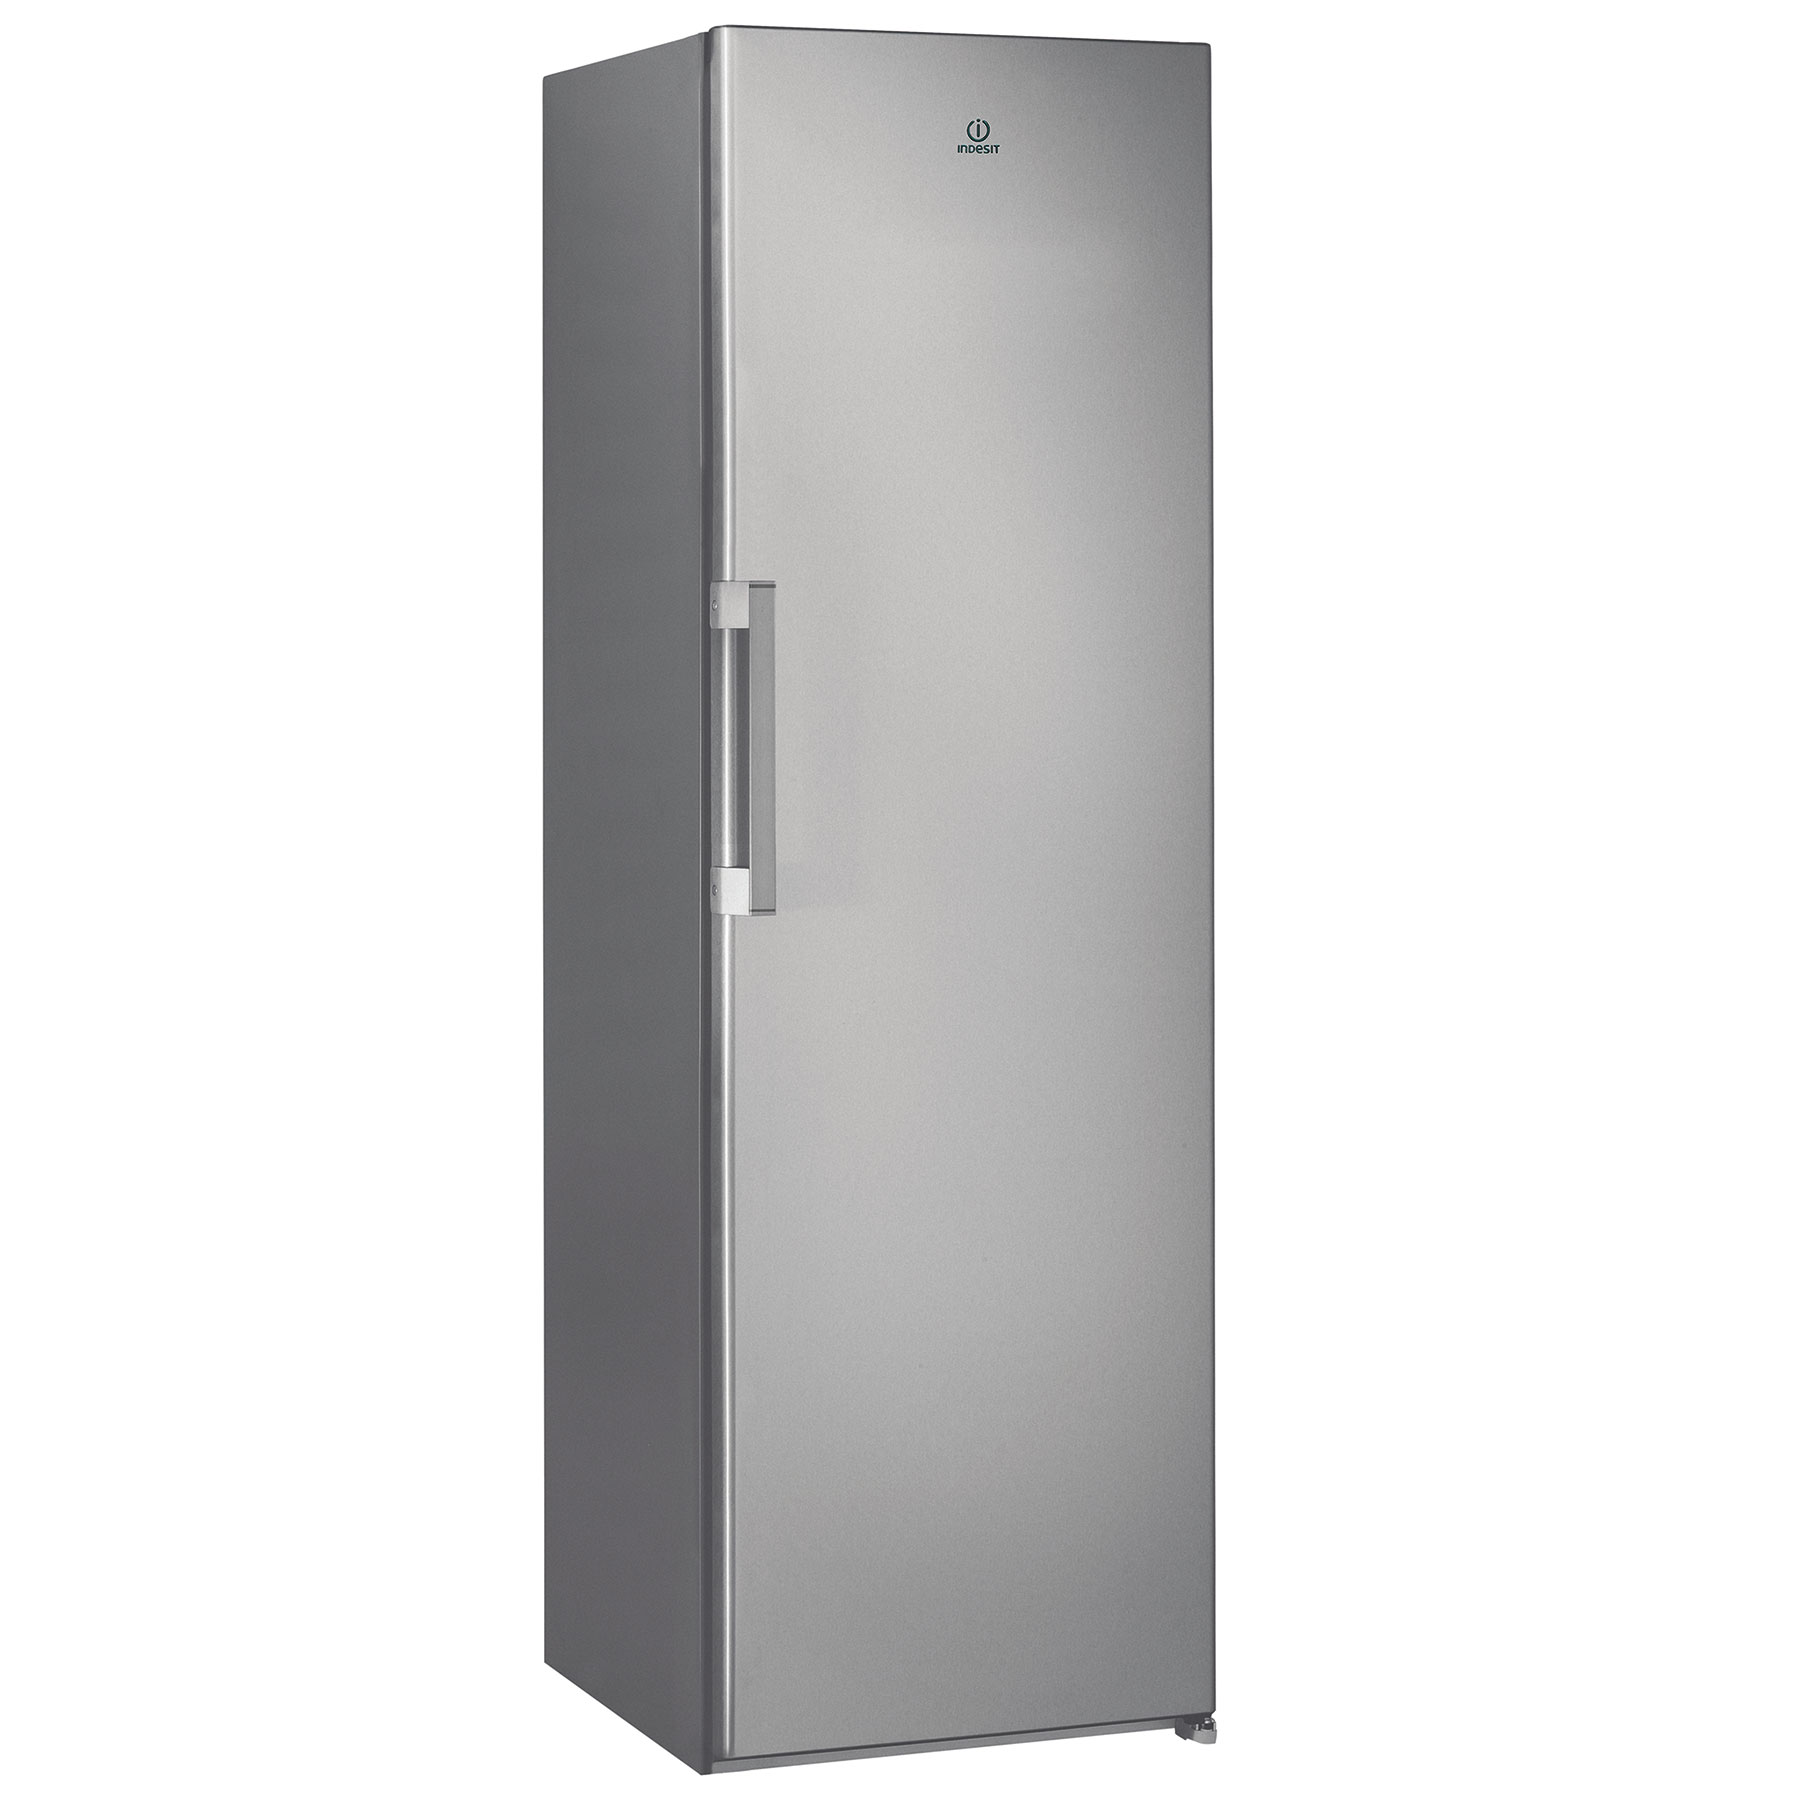 indesit si62s 60cm tall larder fridge in silver 1 67m e rated 323l